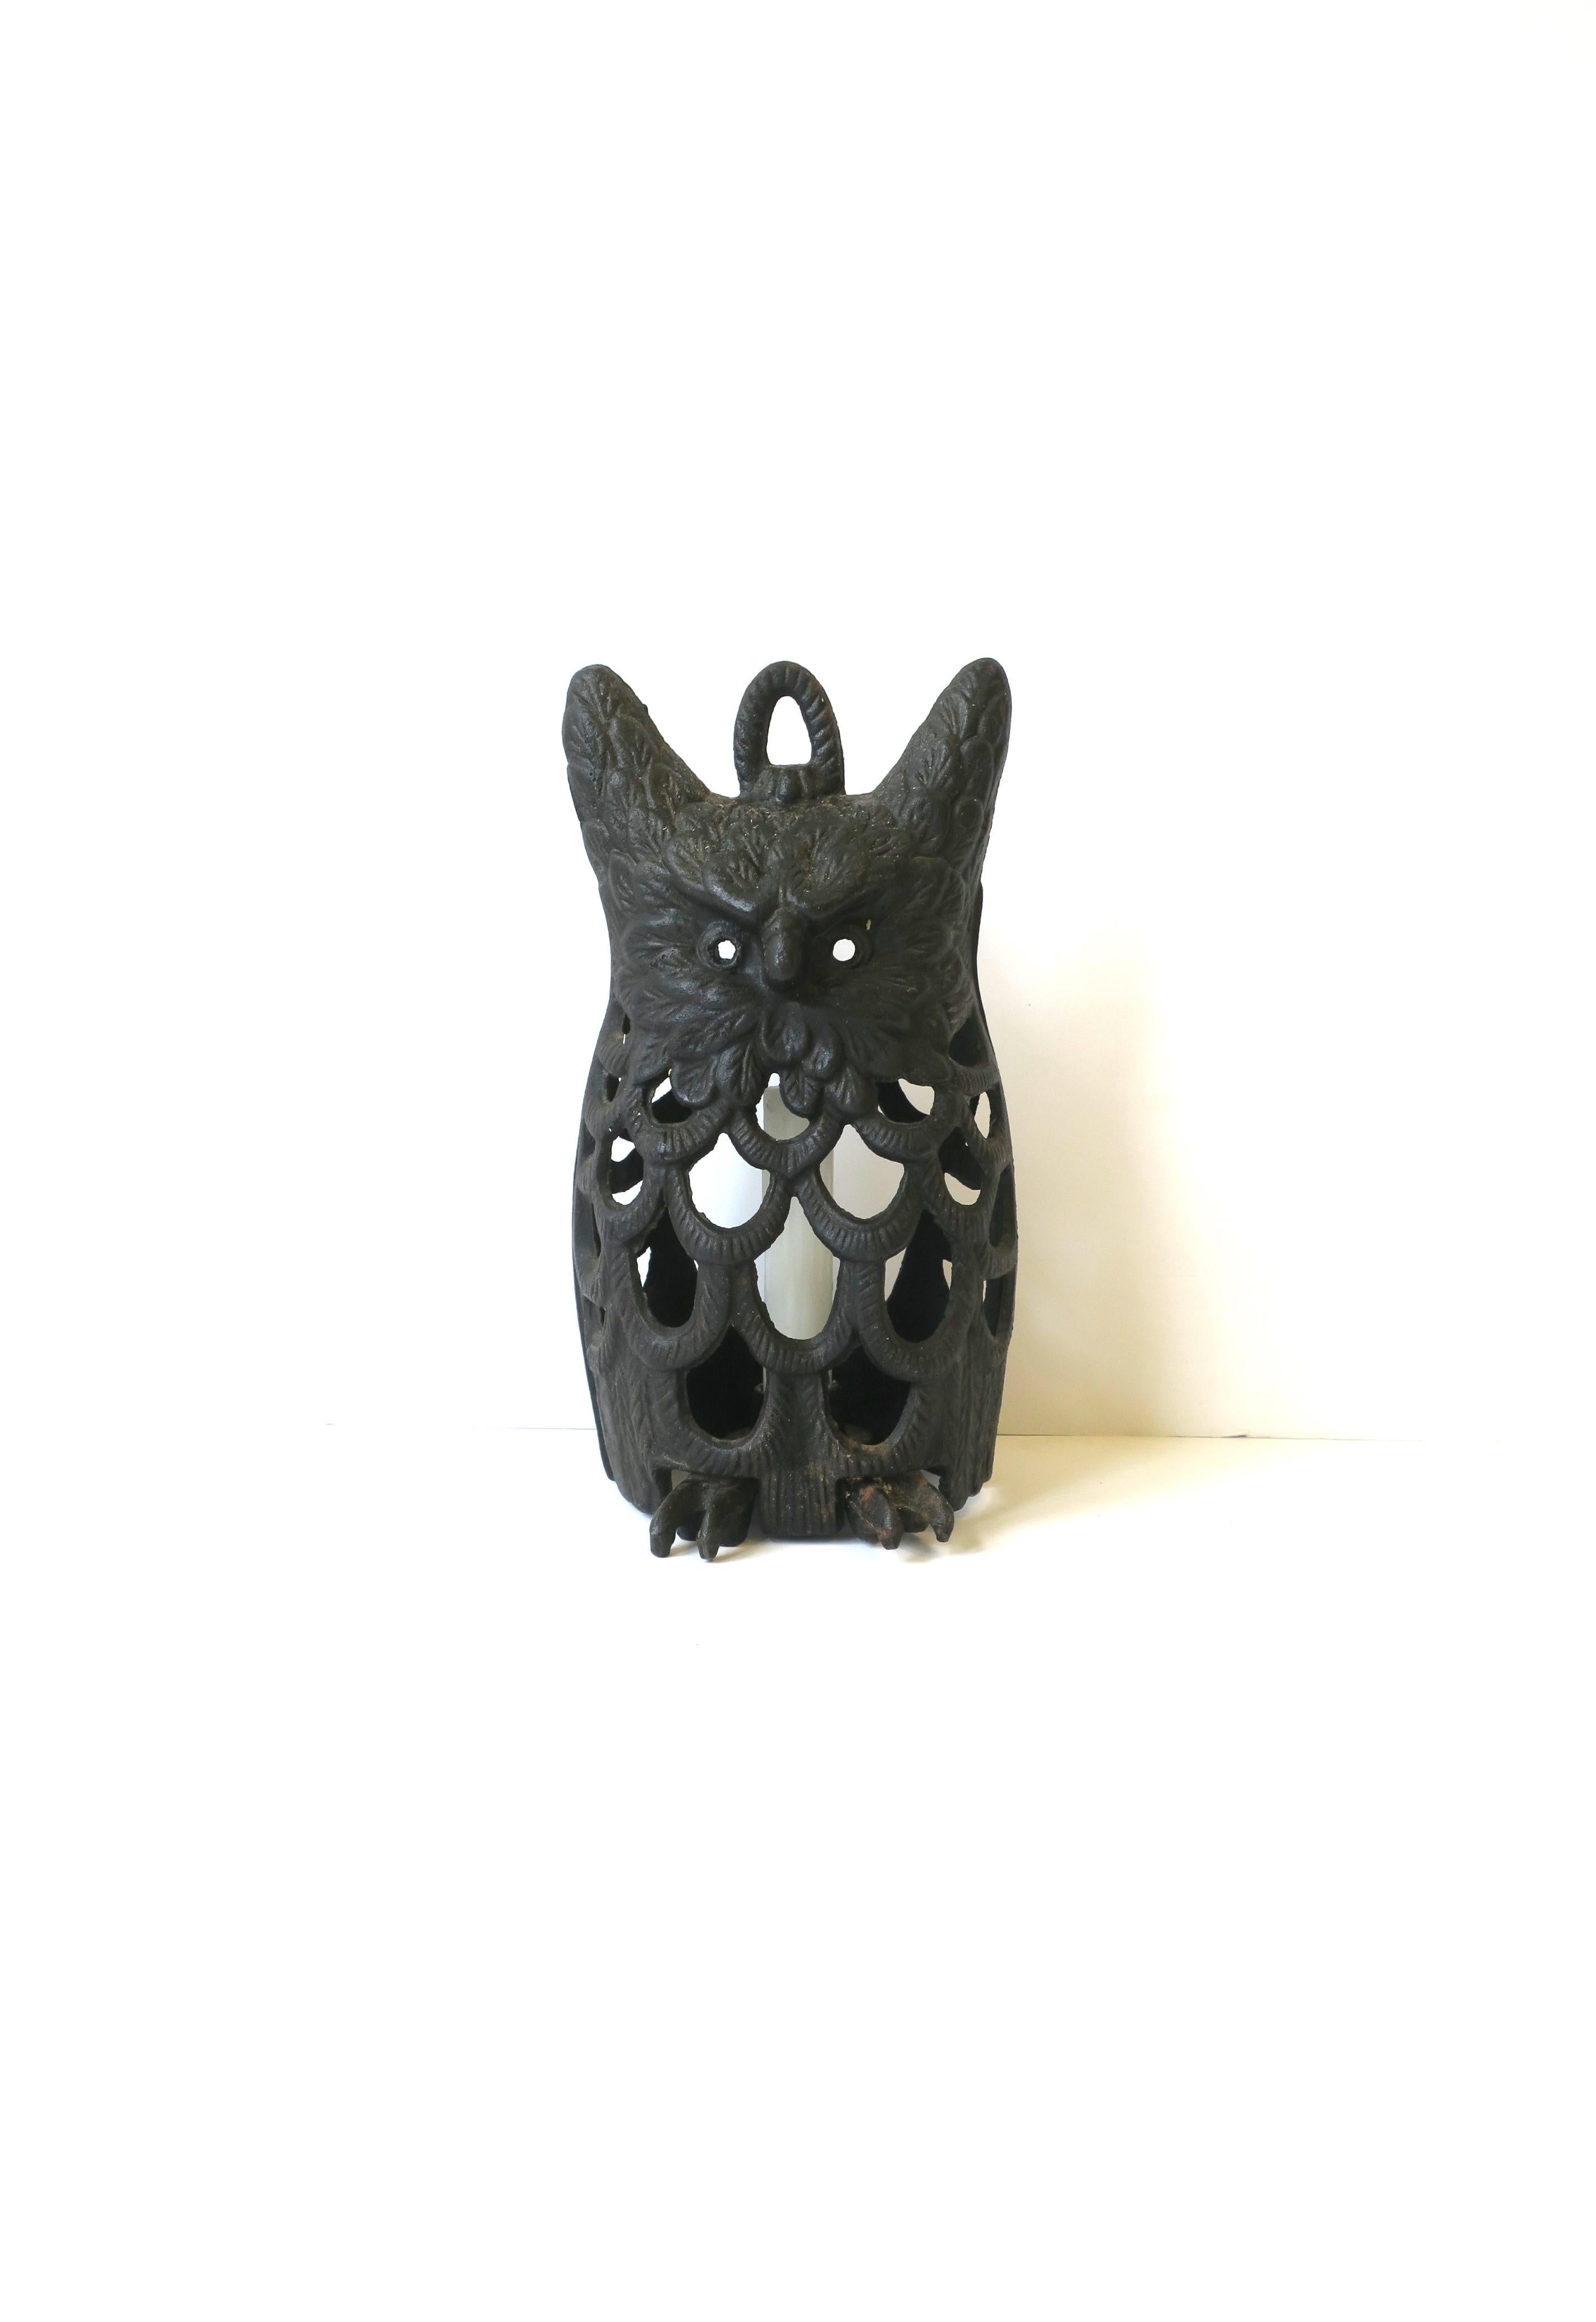 A substantial vintage Japanese owl candle lantern made of blackened iron. Lantern holds a tapper candle within its base area. Owl's body is beautifully designed with 'perforated feathers' allowing light to flow. Lantern can stand on its own or be